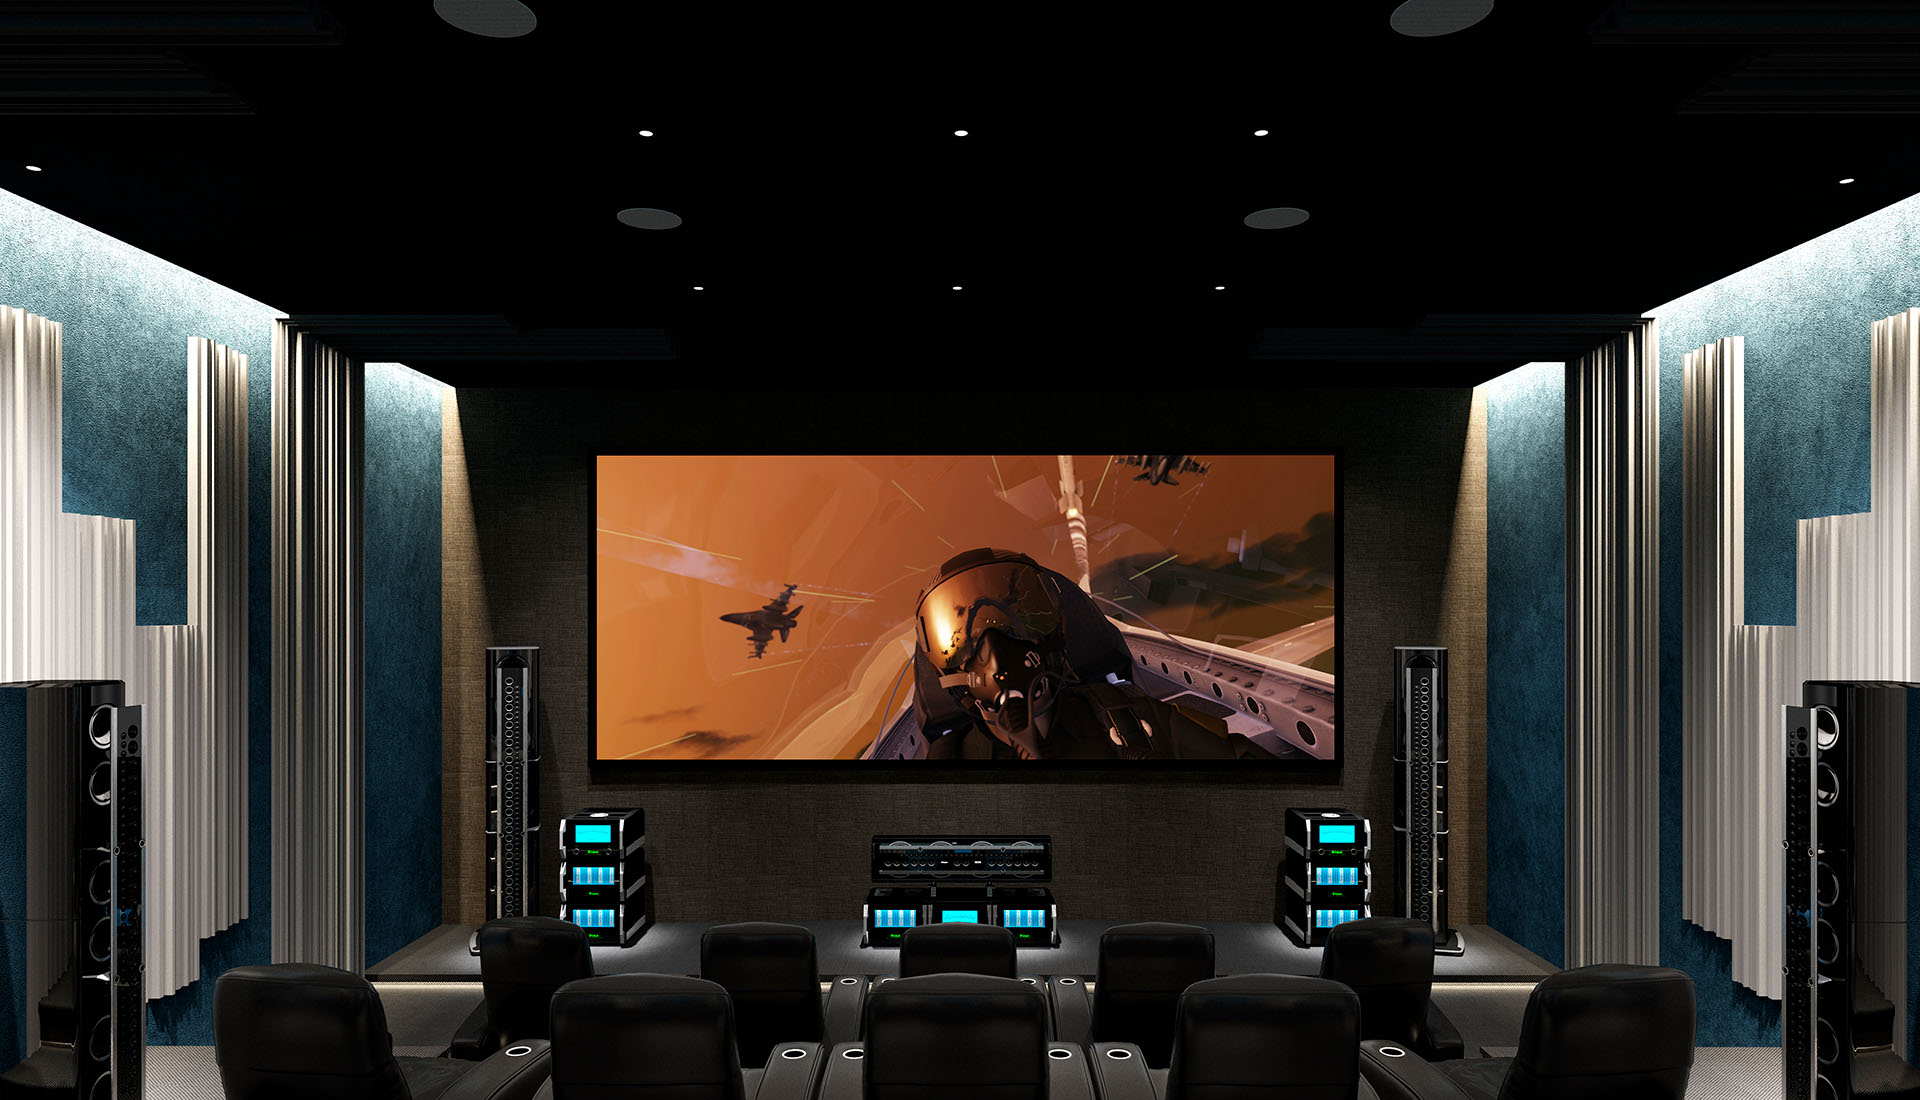 Mcintosh Home Theater Systems Crafted